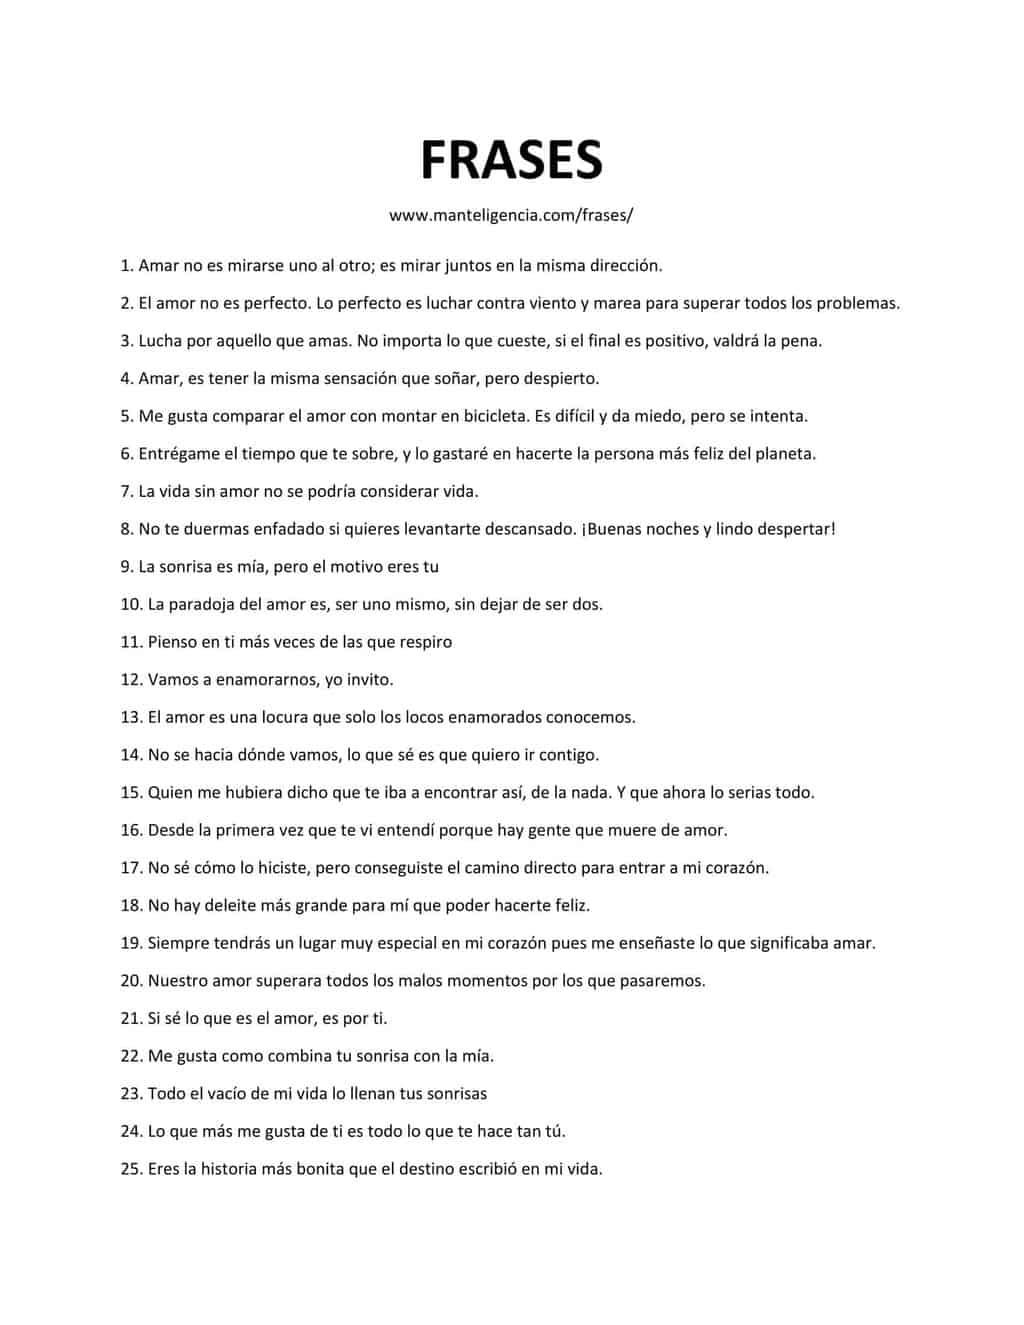 Downloadable and printable list of frases as jpg or pdf